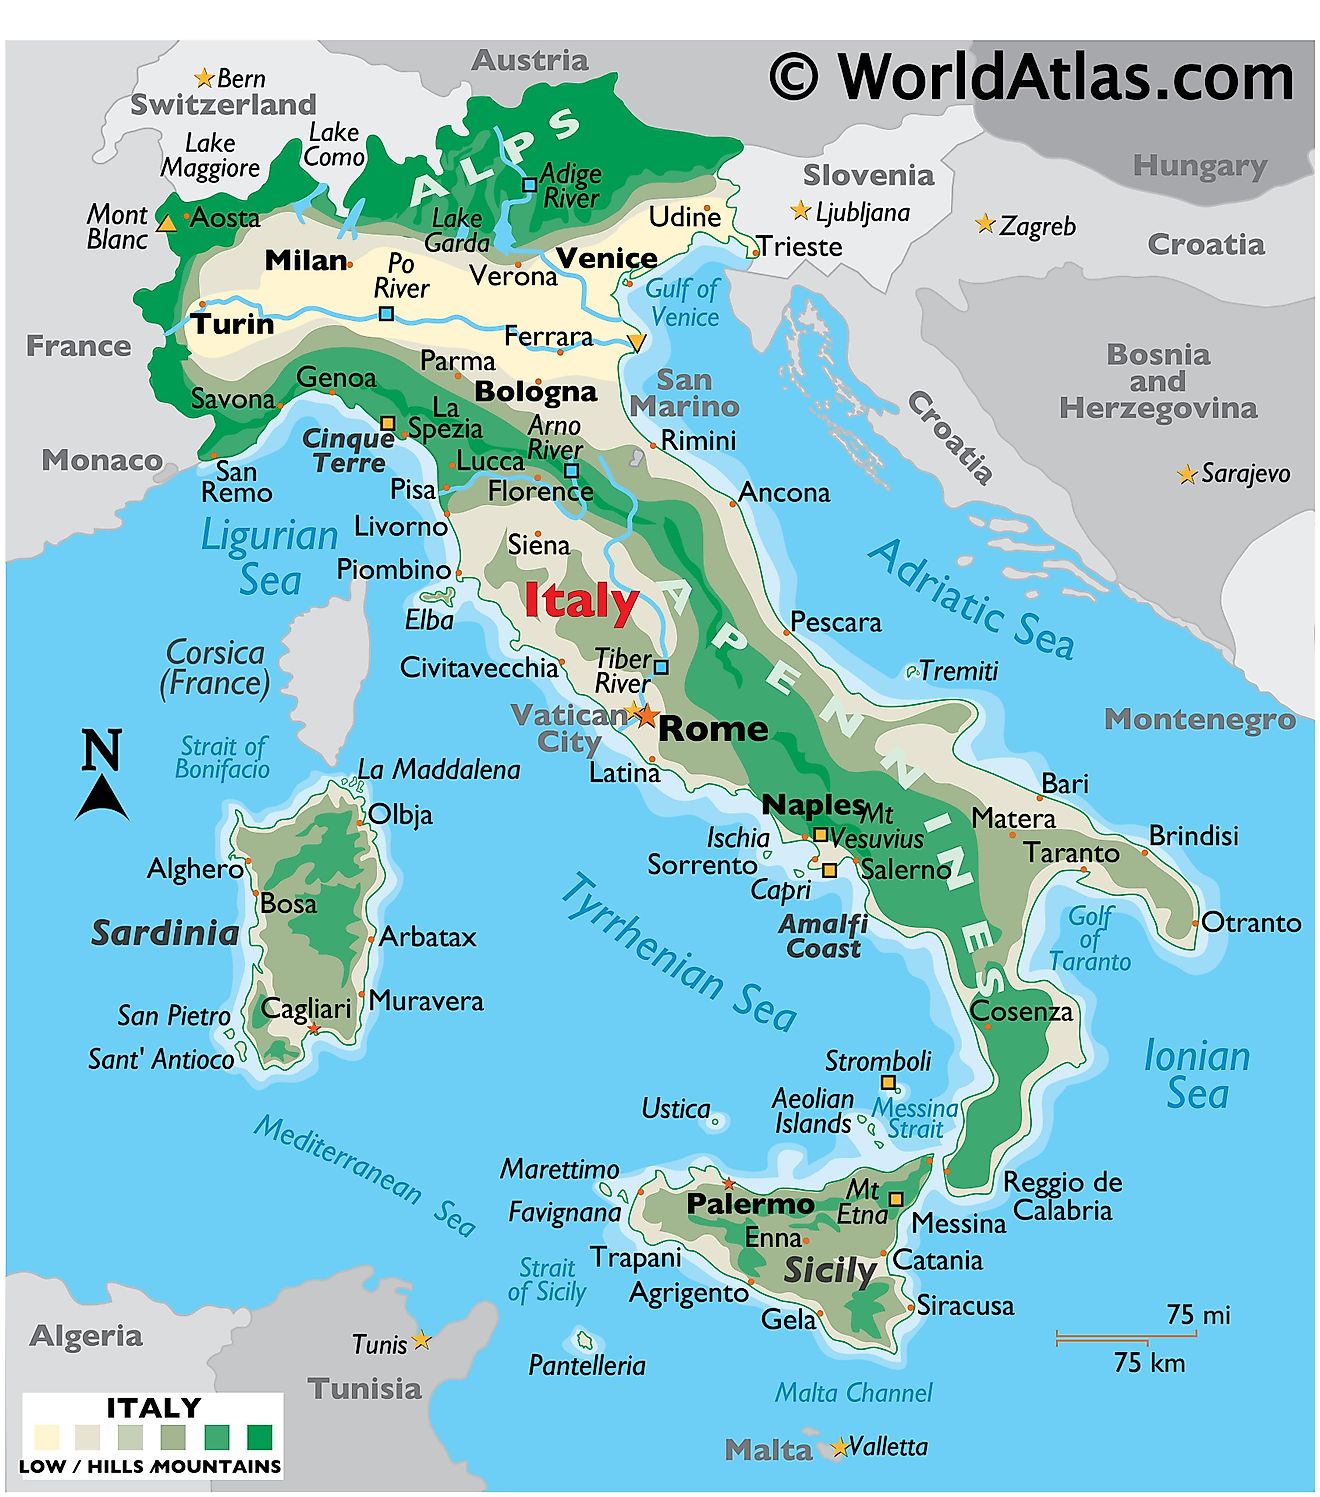 Physical Map of Italy showing terrain, mountains, extreme points, islands, rivers, major cities, international boundaries, etc.